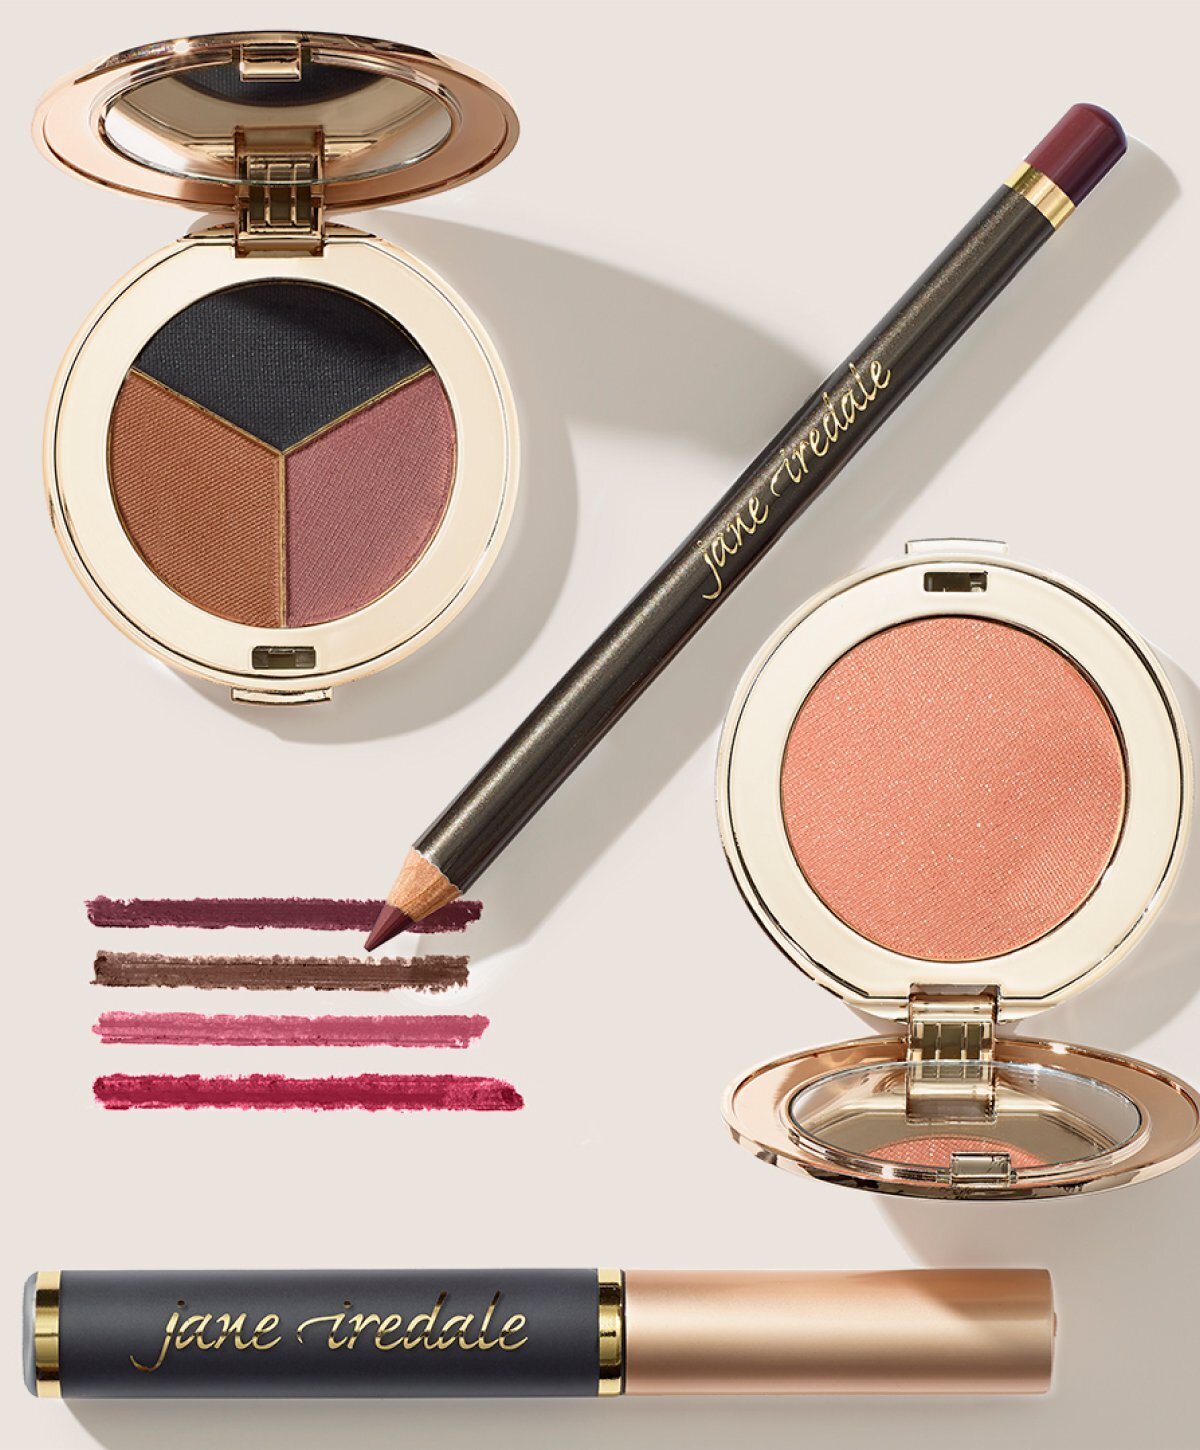 Grand Rapids cosmetics by Jane Iredale